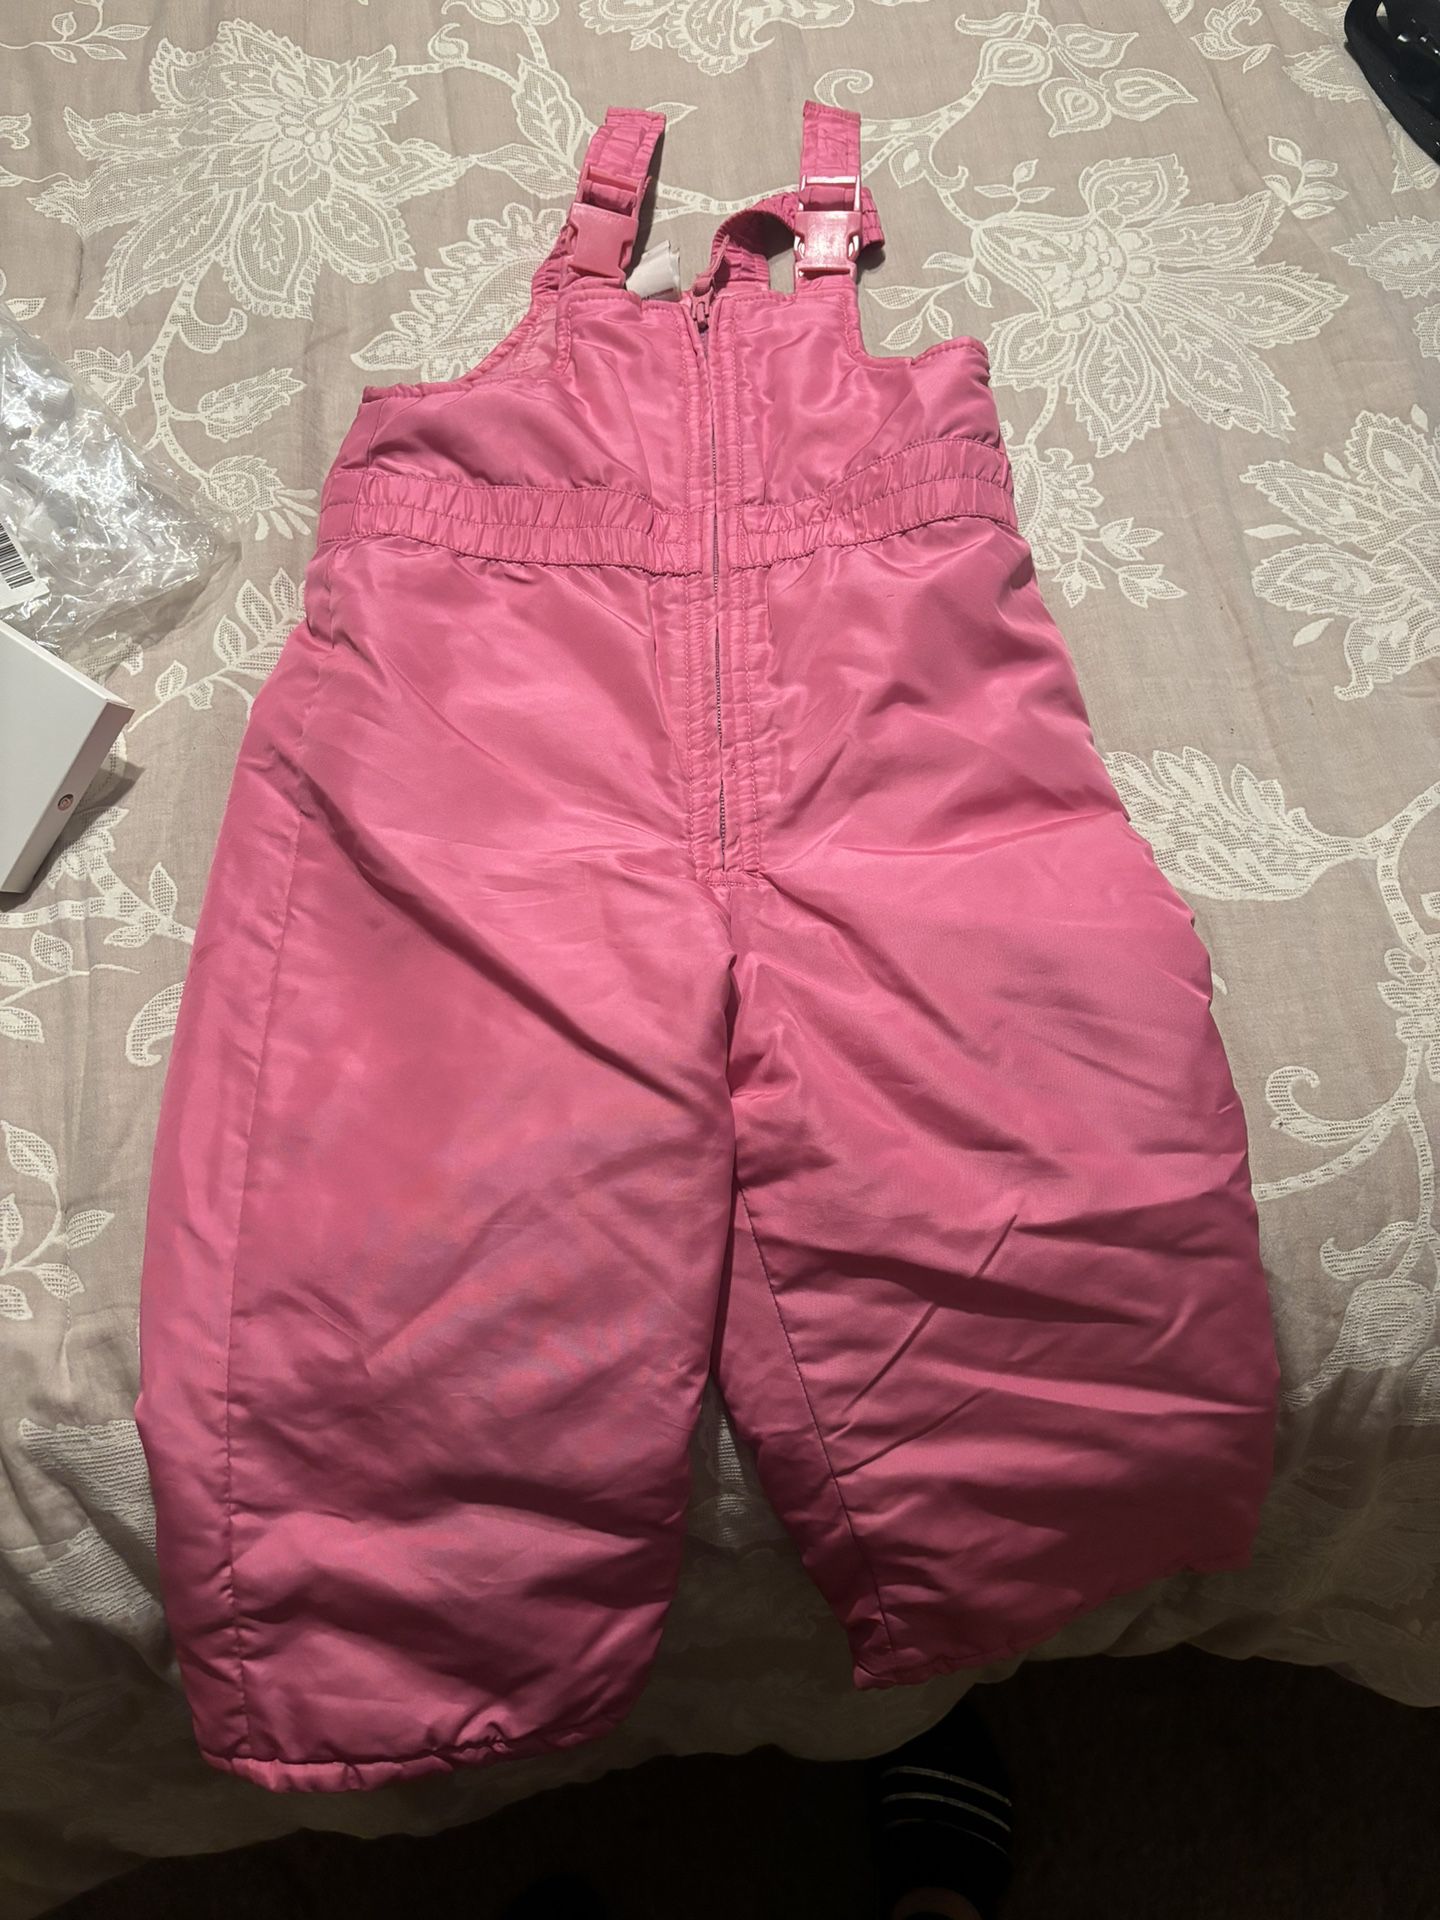 Toddler Girl Snow Gear And Boots 